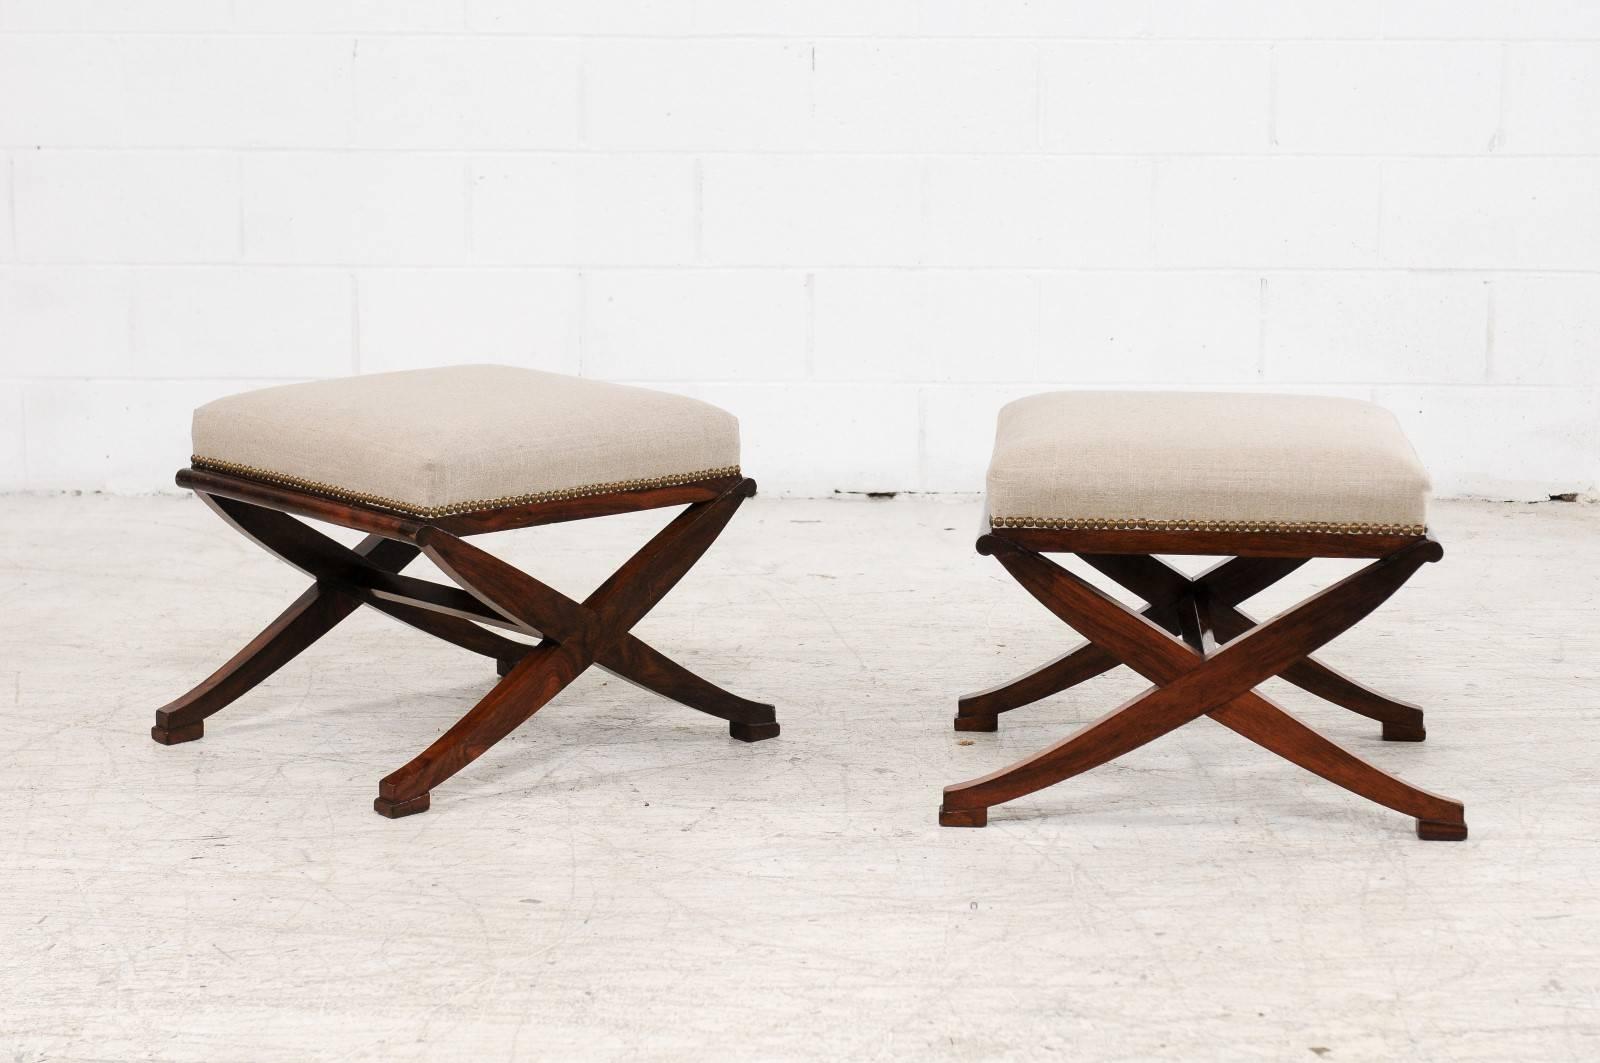 A pair of French mahogany or rosewood X-form stools from the second half of the 19th century with re-upholstered seats. Each of this pair of French stools features an almost square seat covered with a new linen upholstery, accented with a brass